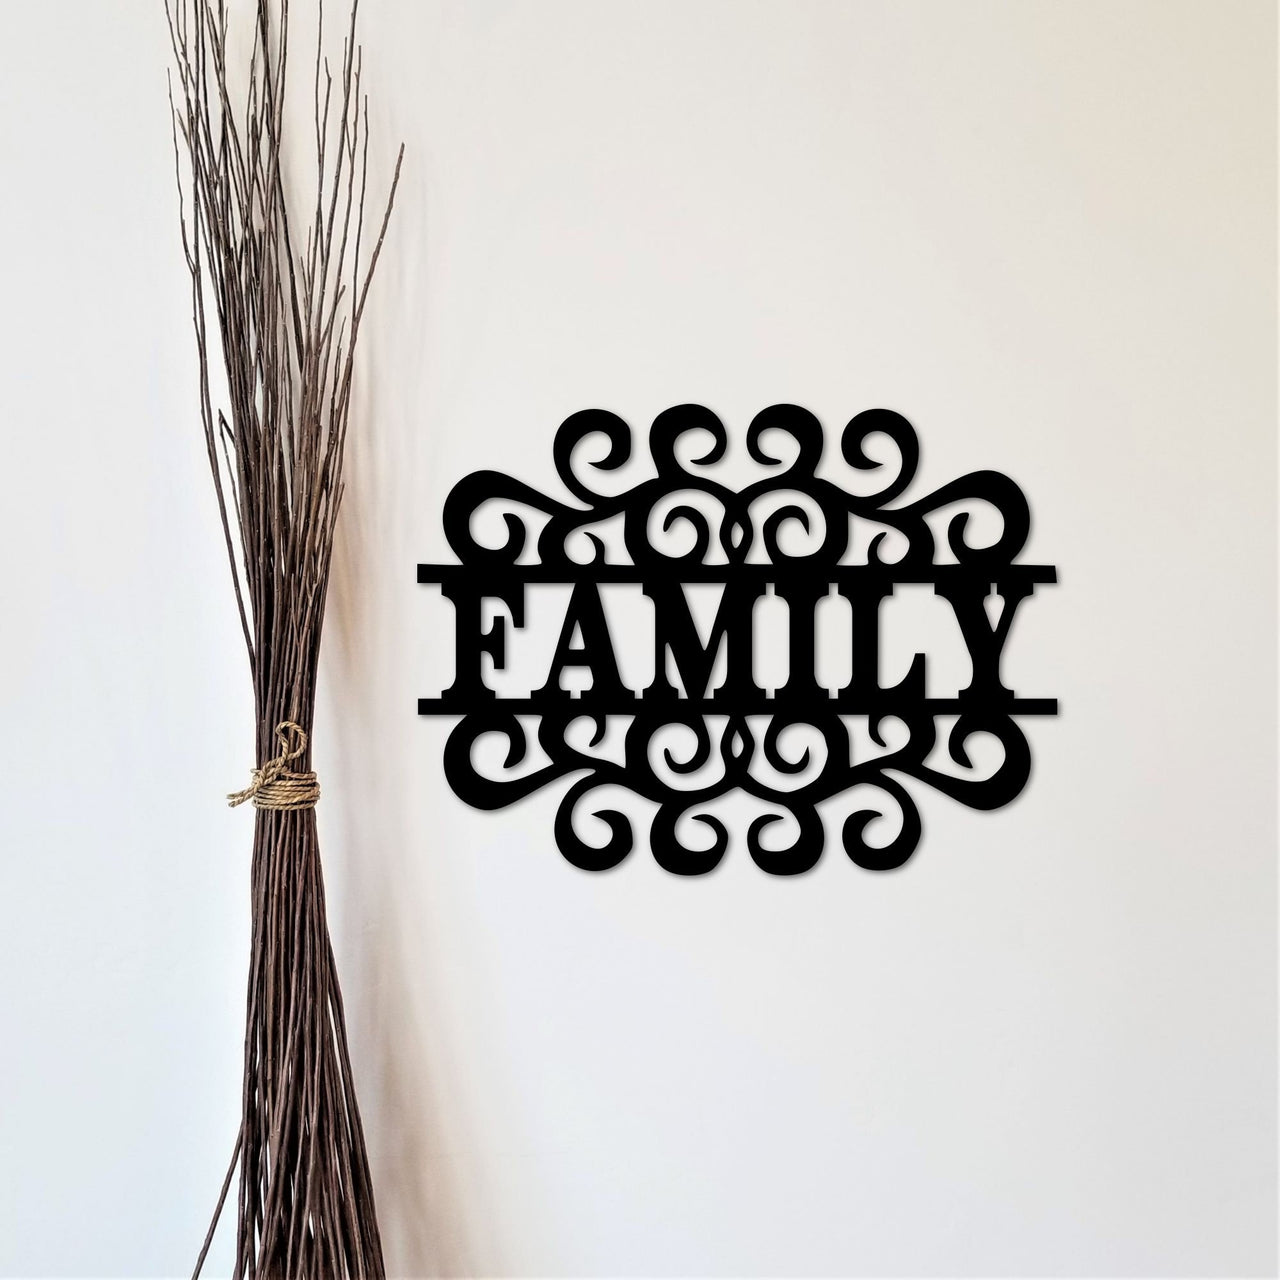 Family Metal Word Art with Scrolls |Metal Family Sign | Gallery Wall Decor | Housewarming Gift | Living Room Decor | Gift Idea for Her